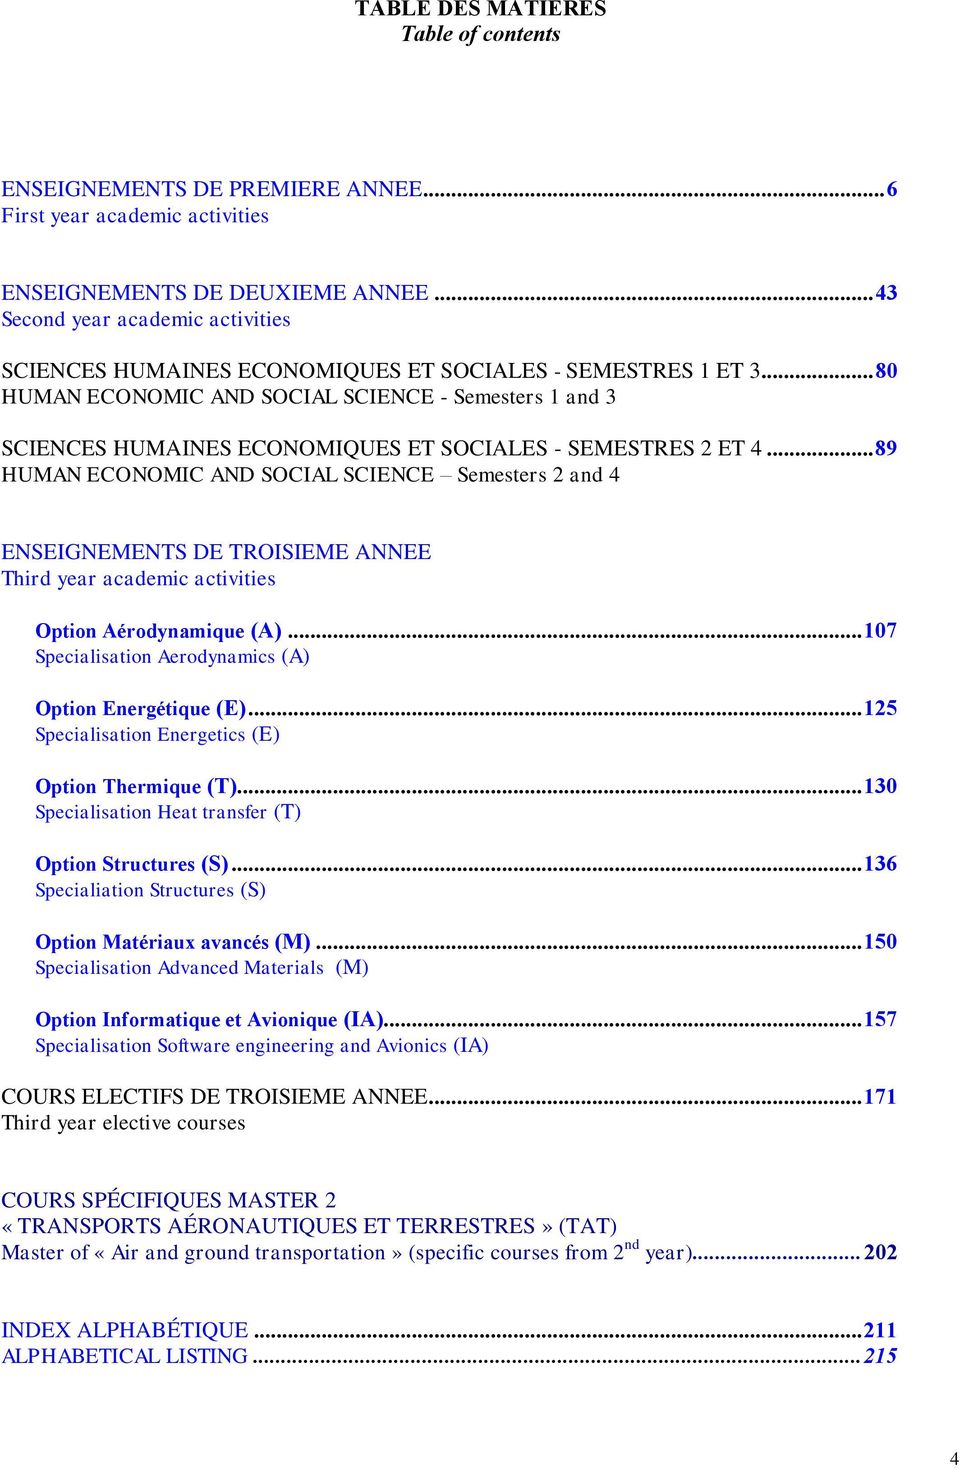 .. 80 HUMAN ECONOMIC AND SOCIAL SCIENCE - Semesters 1 and 3 SCIENCES HUMAINES ECONOMIQUES ET SOCIALES - SEMESTRES 2 ET 4.